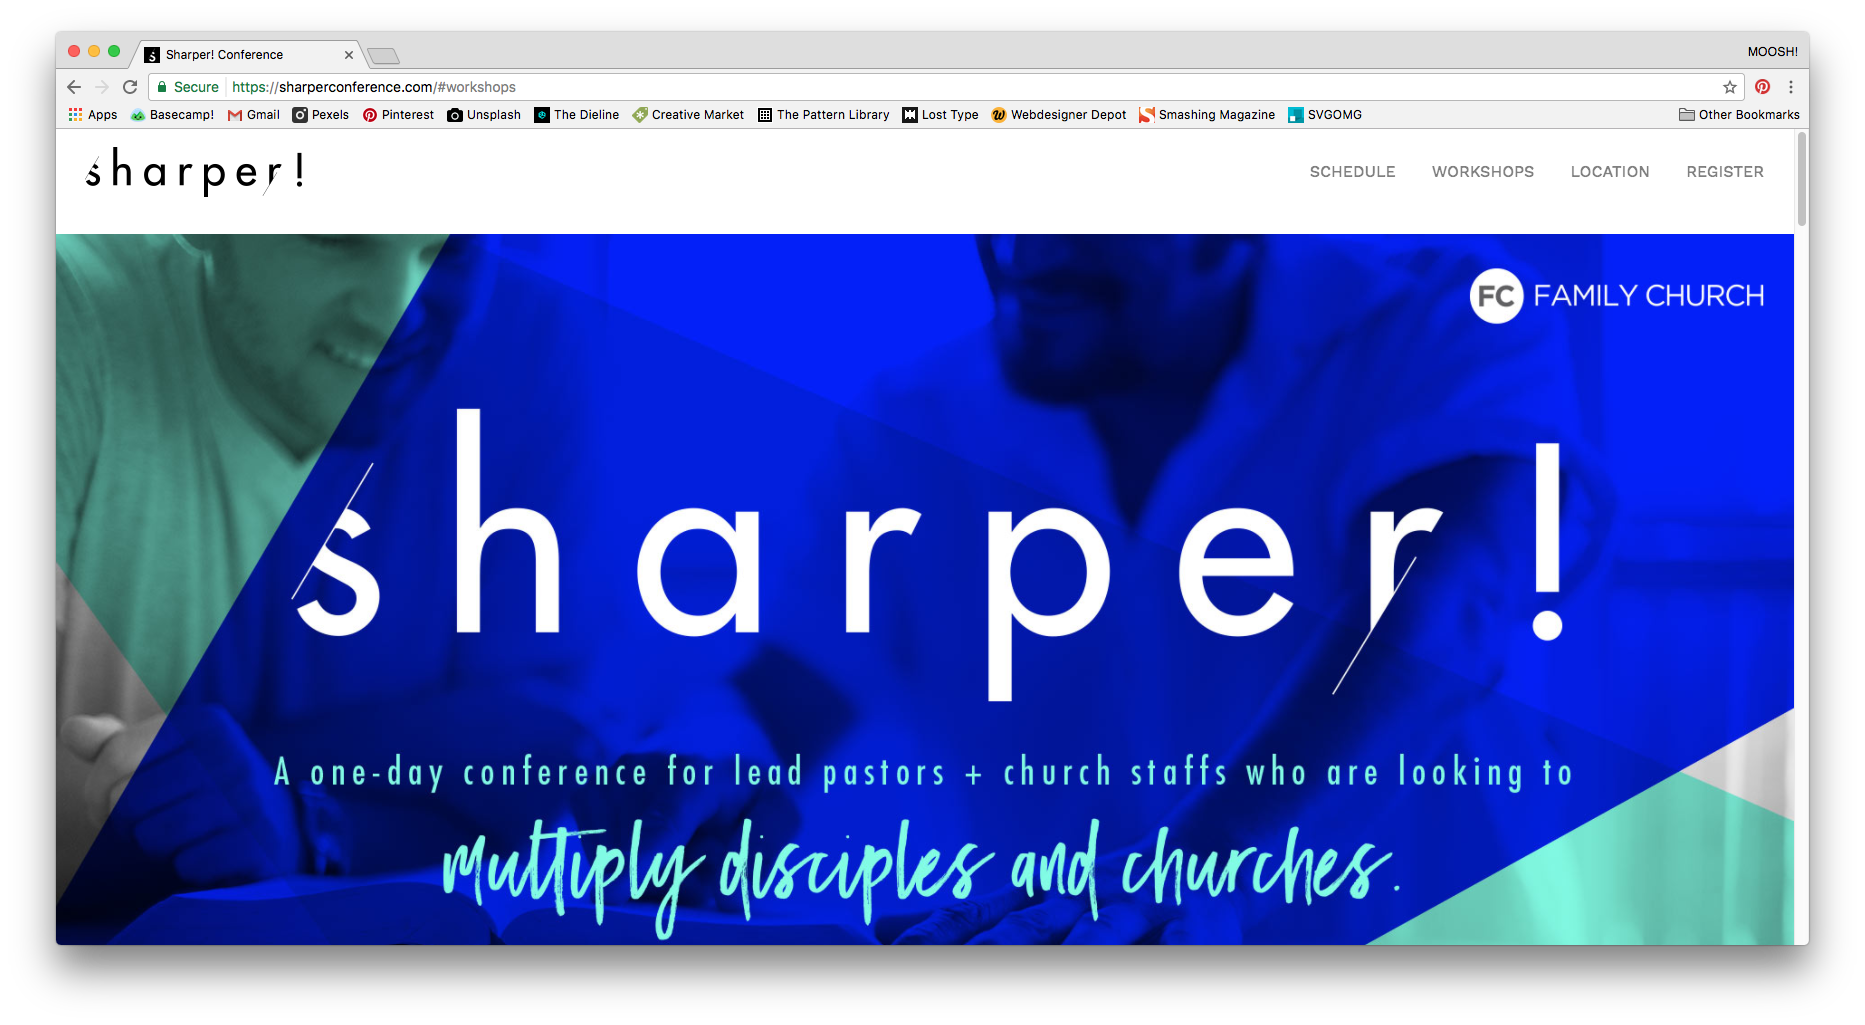 Sharper Conference website which we designed, developed and branded. This image shows the landing page with a sticky navigation to allow full functionality to the user regardless of their location on the page.